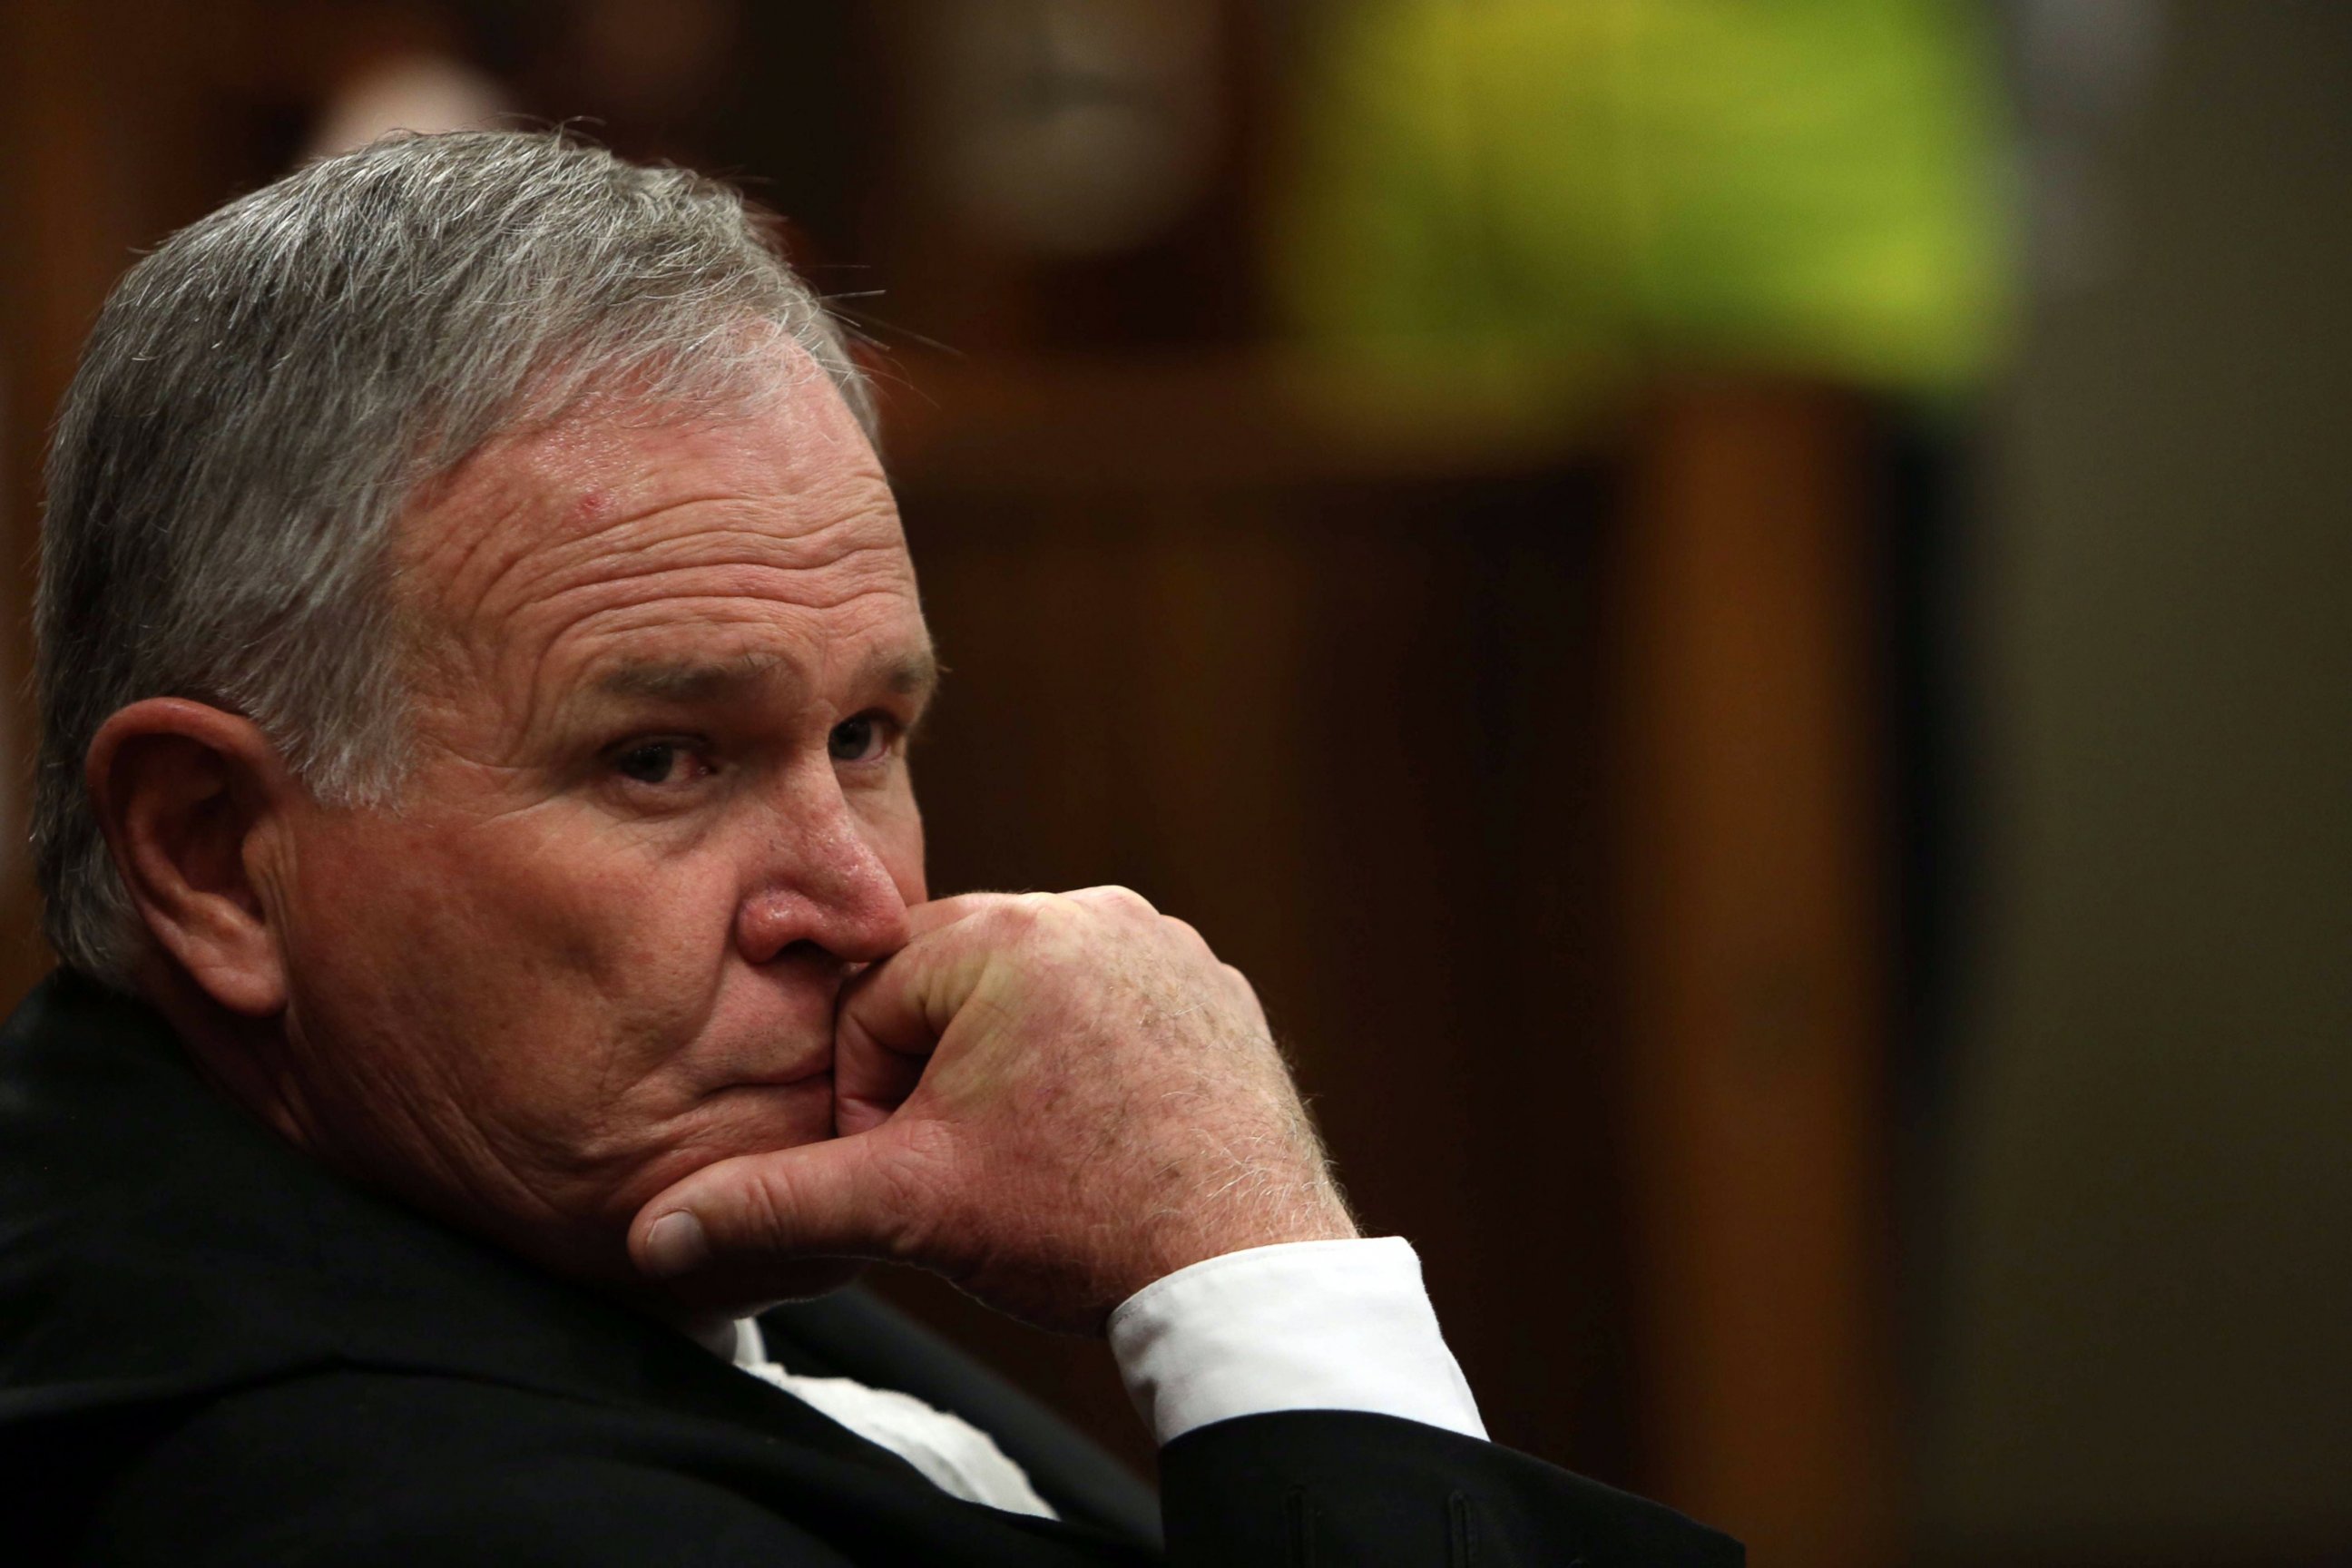 PHOTO: Defence lawyer Barry Roux, who represents paralympian Oscar Pistorius